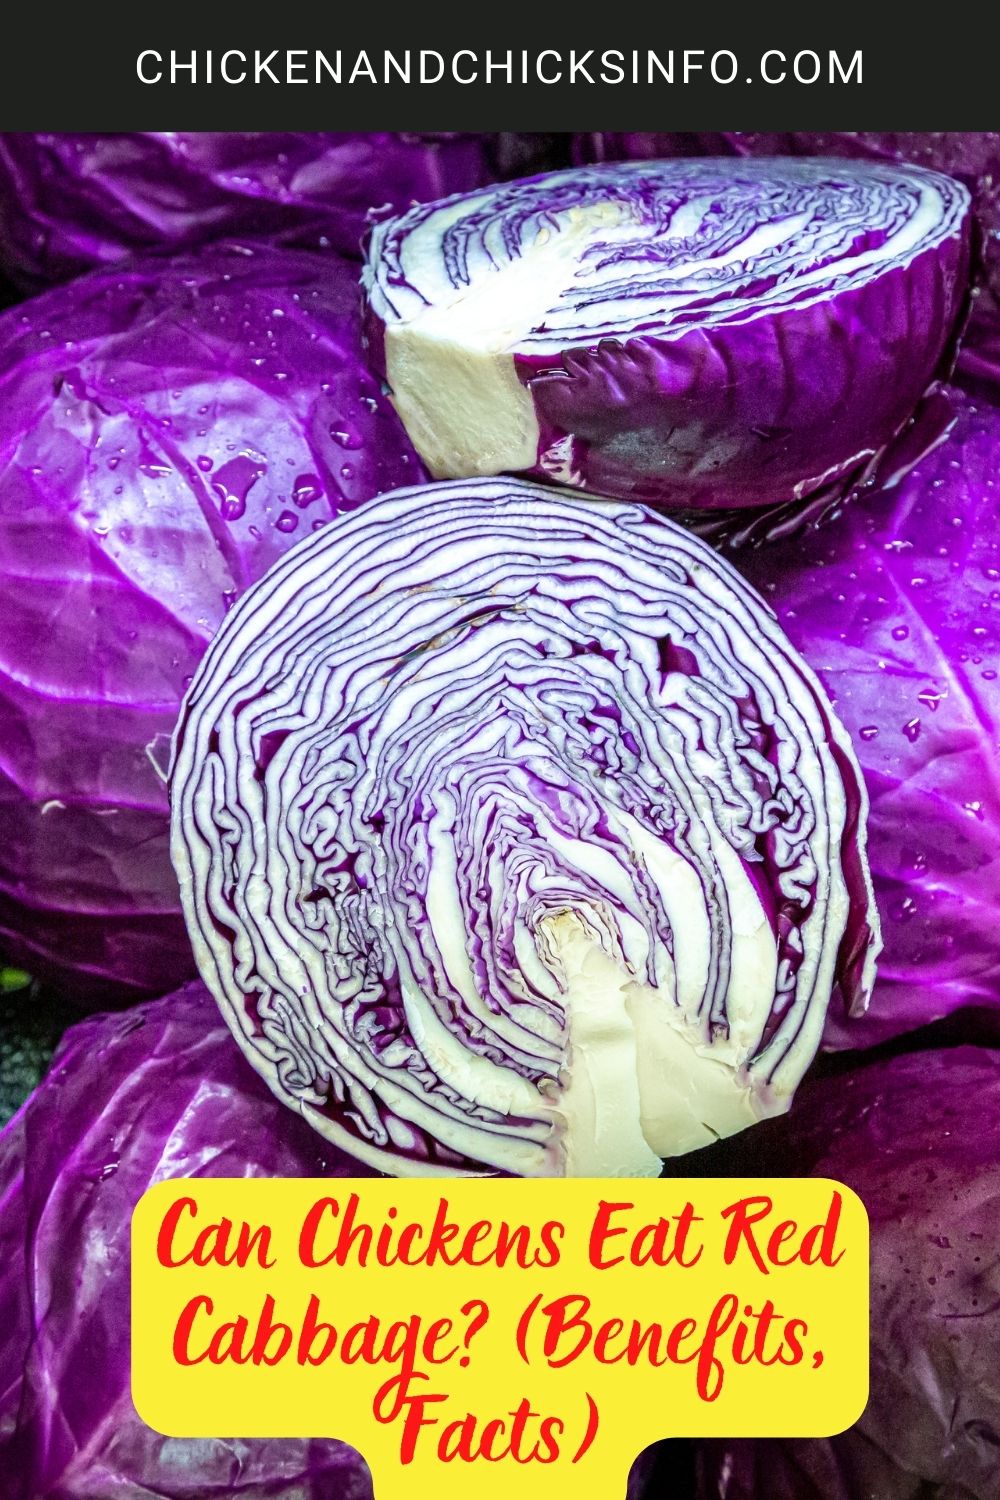 Can Chickens Eat Red Cabbage? (Benefits, Facts) poster.
